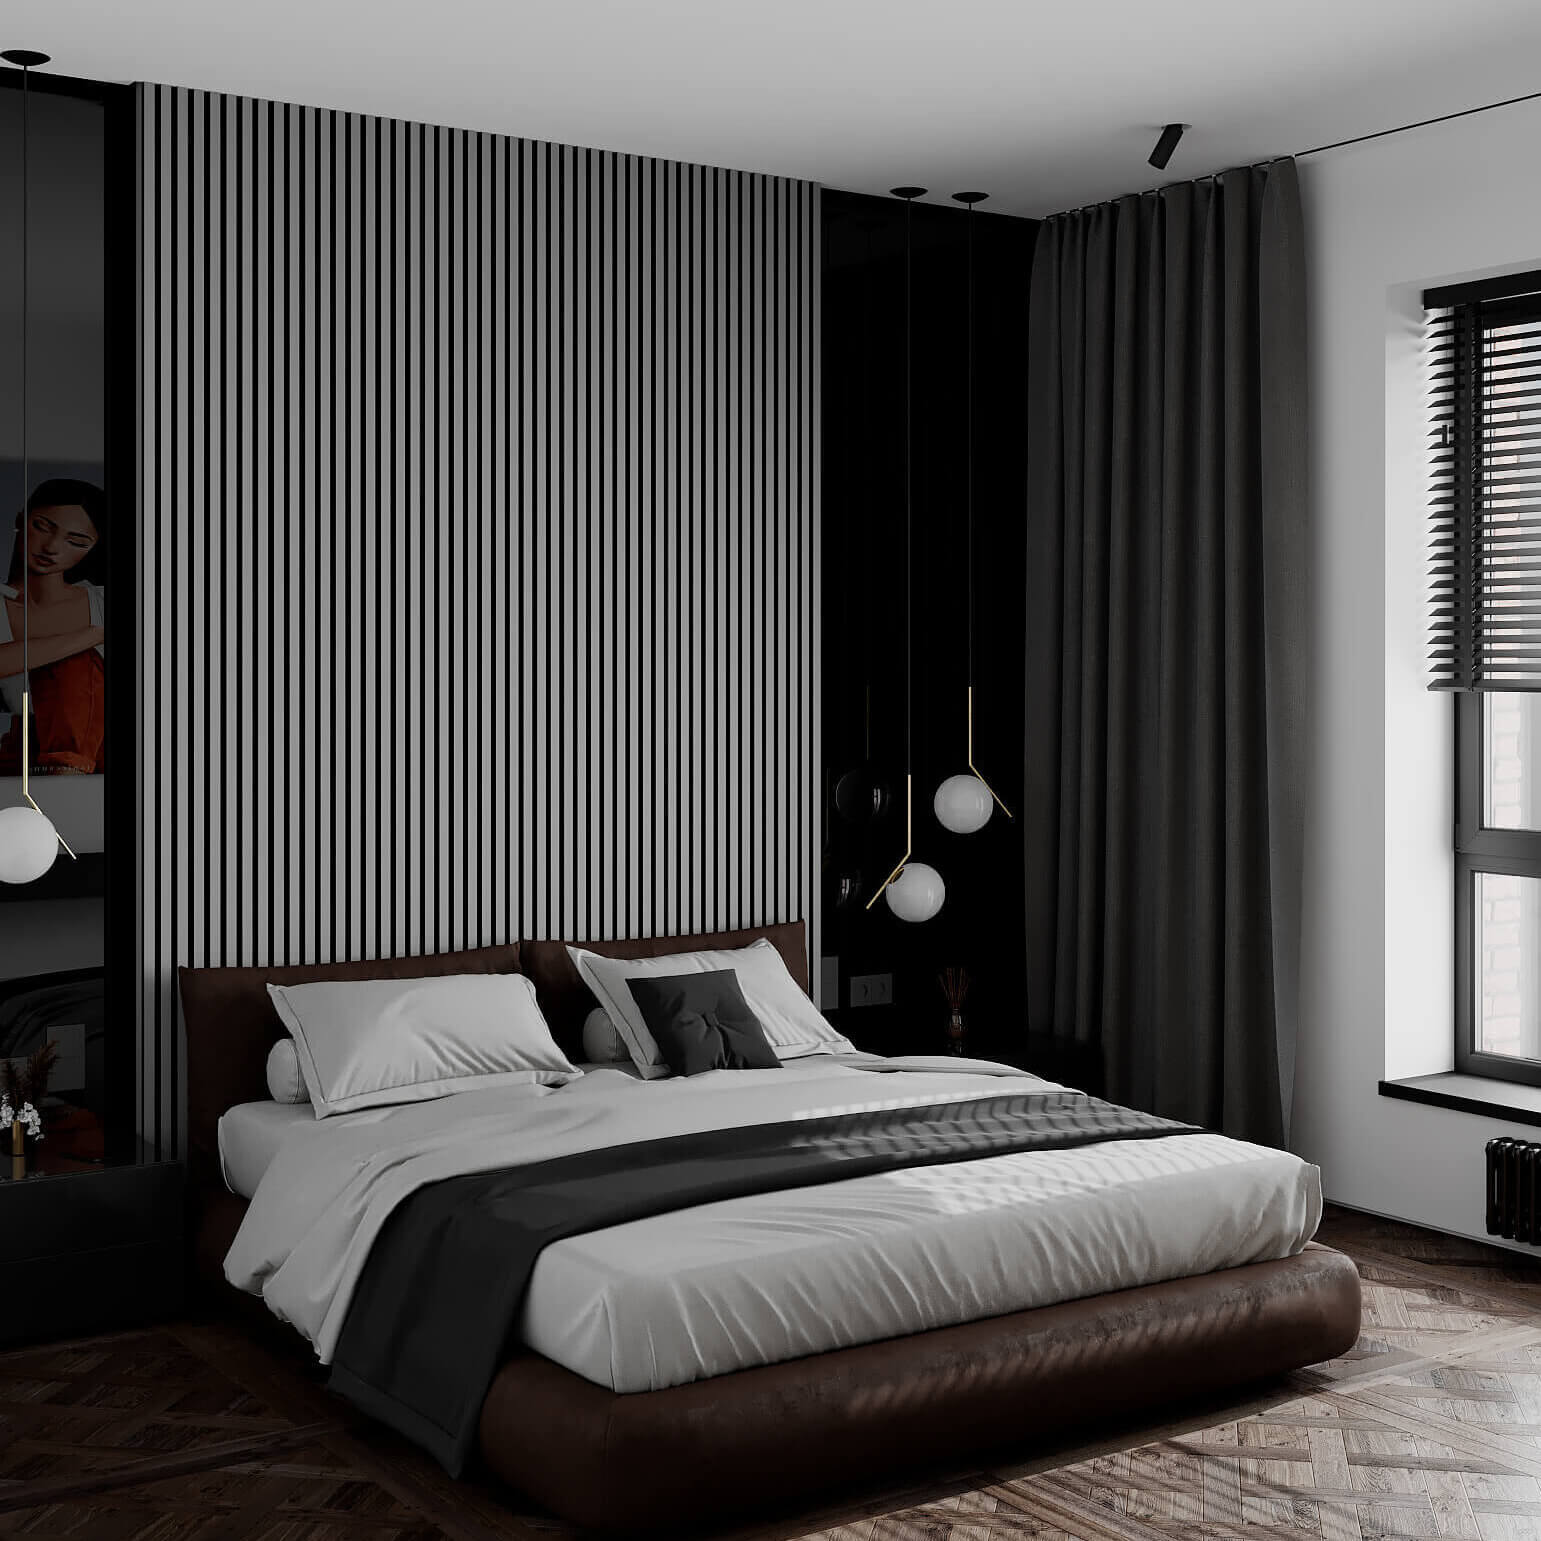 Wood Wall Panelling Grey Inspiration Photo Installed in Bedroom